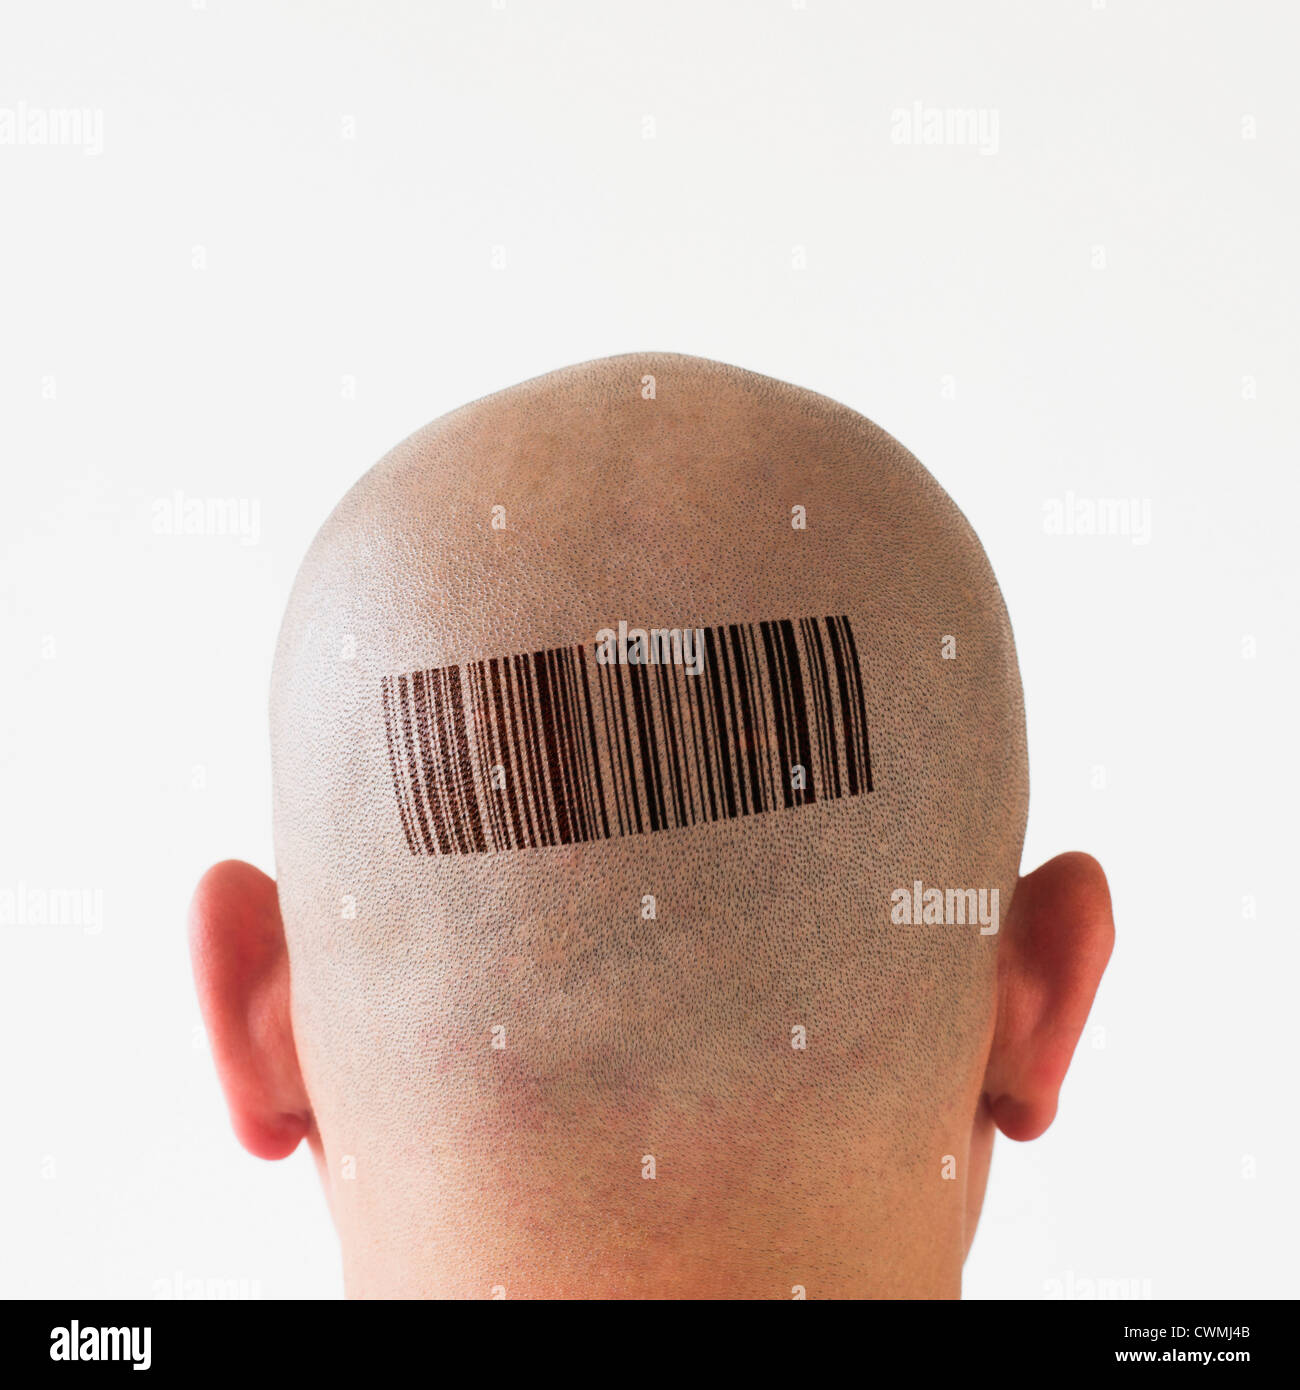 Back view of man with bar code on head Stock Photo